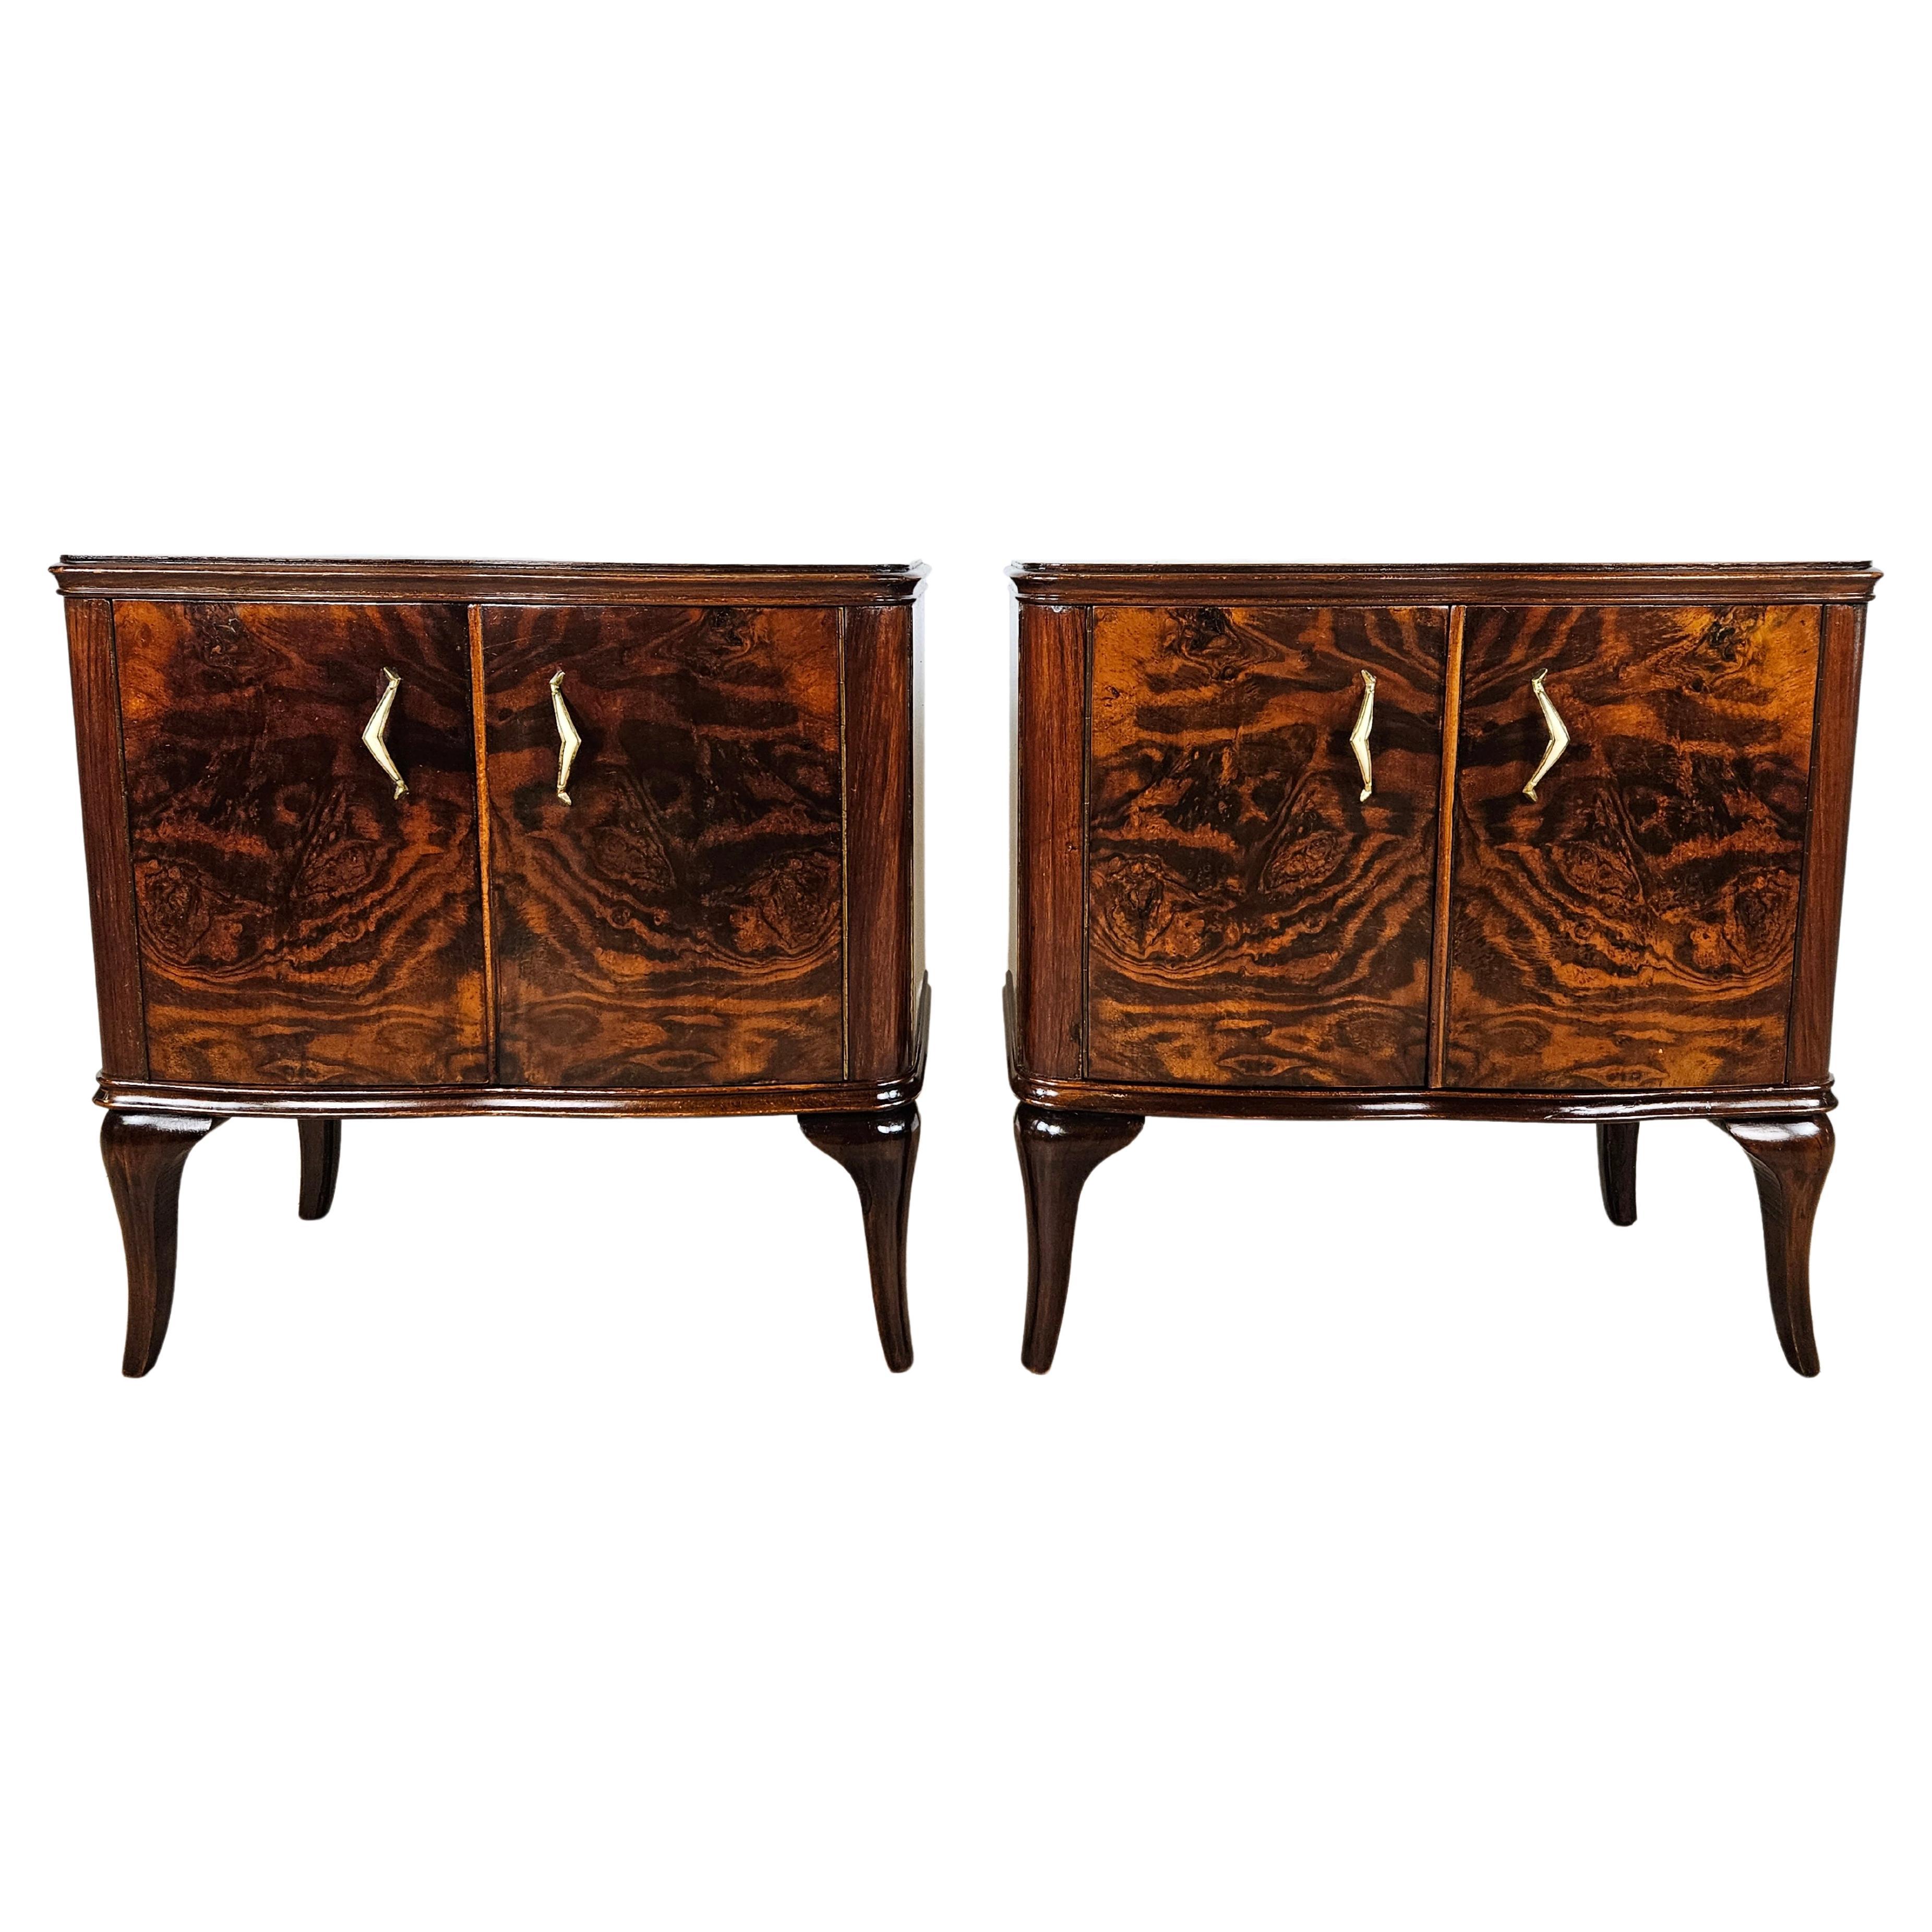 Walnut bedside tables 1950s with brass handles and moved legs 20th century